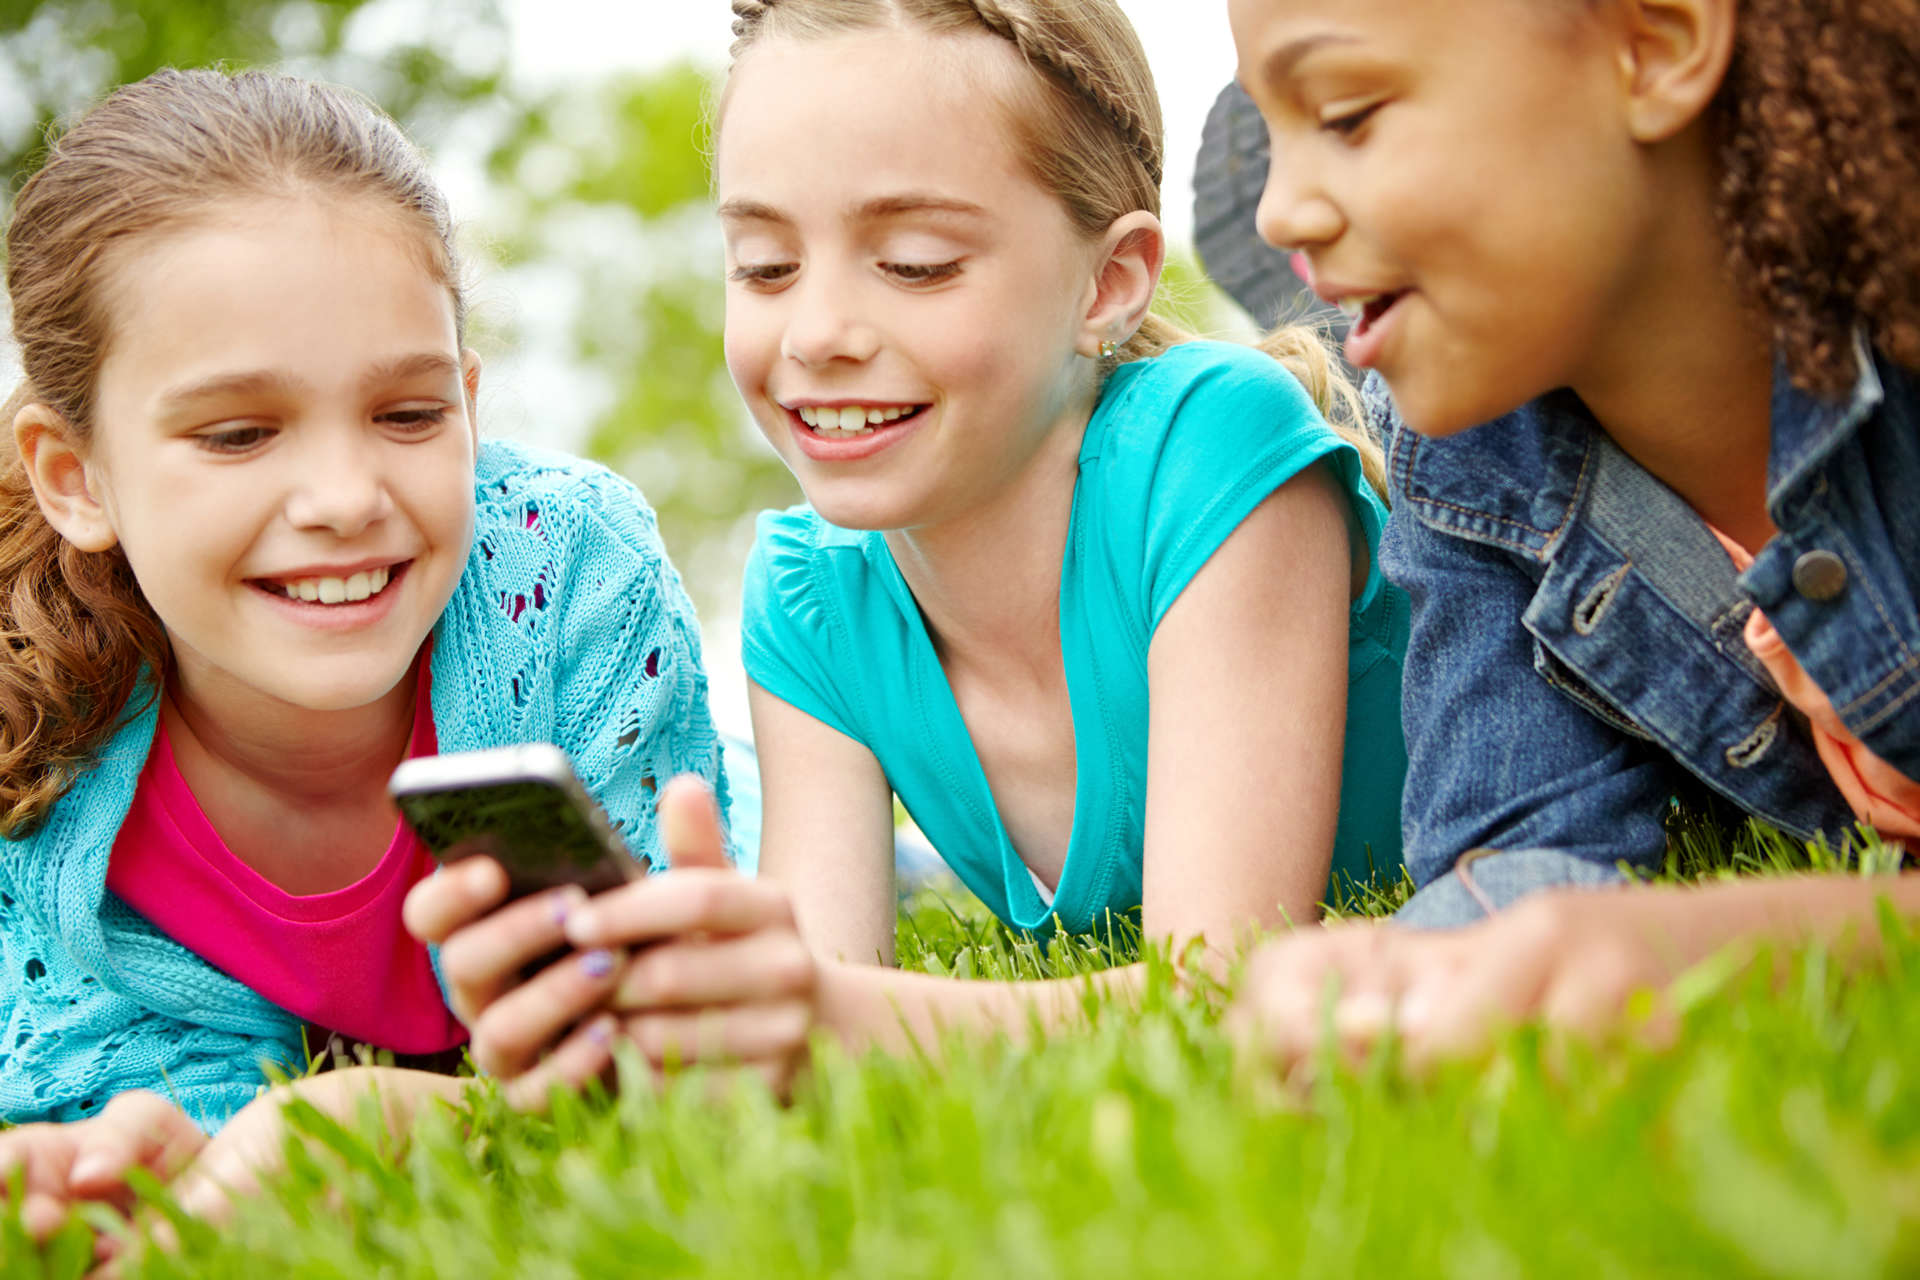 Adolescent Development in an Age of Social Media